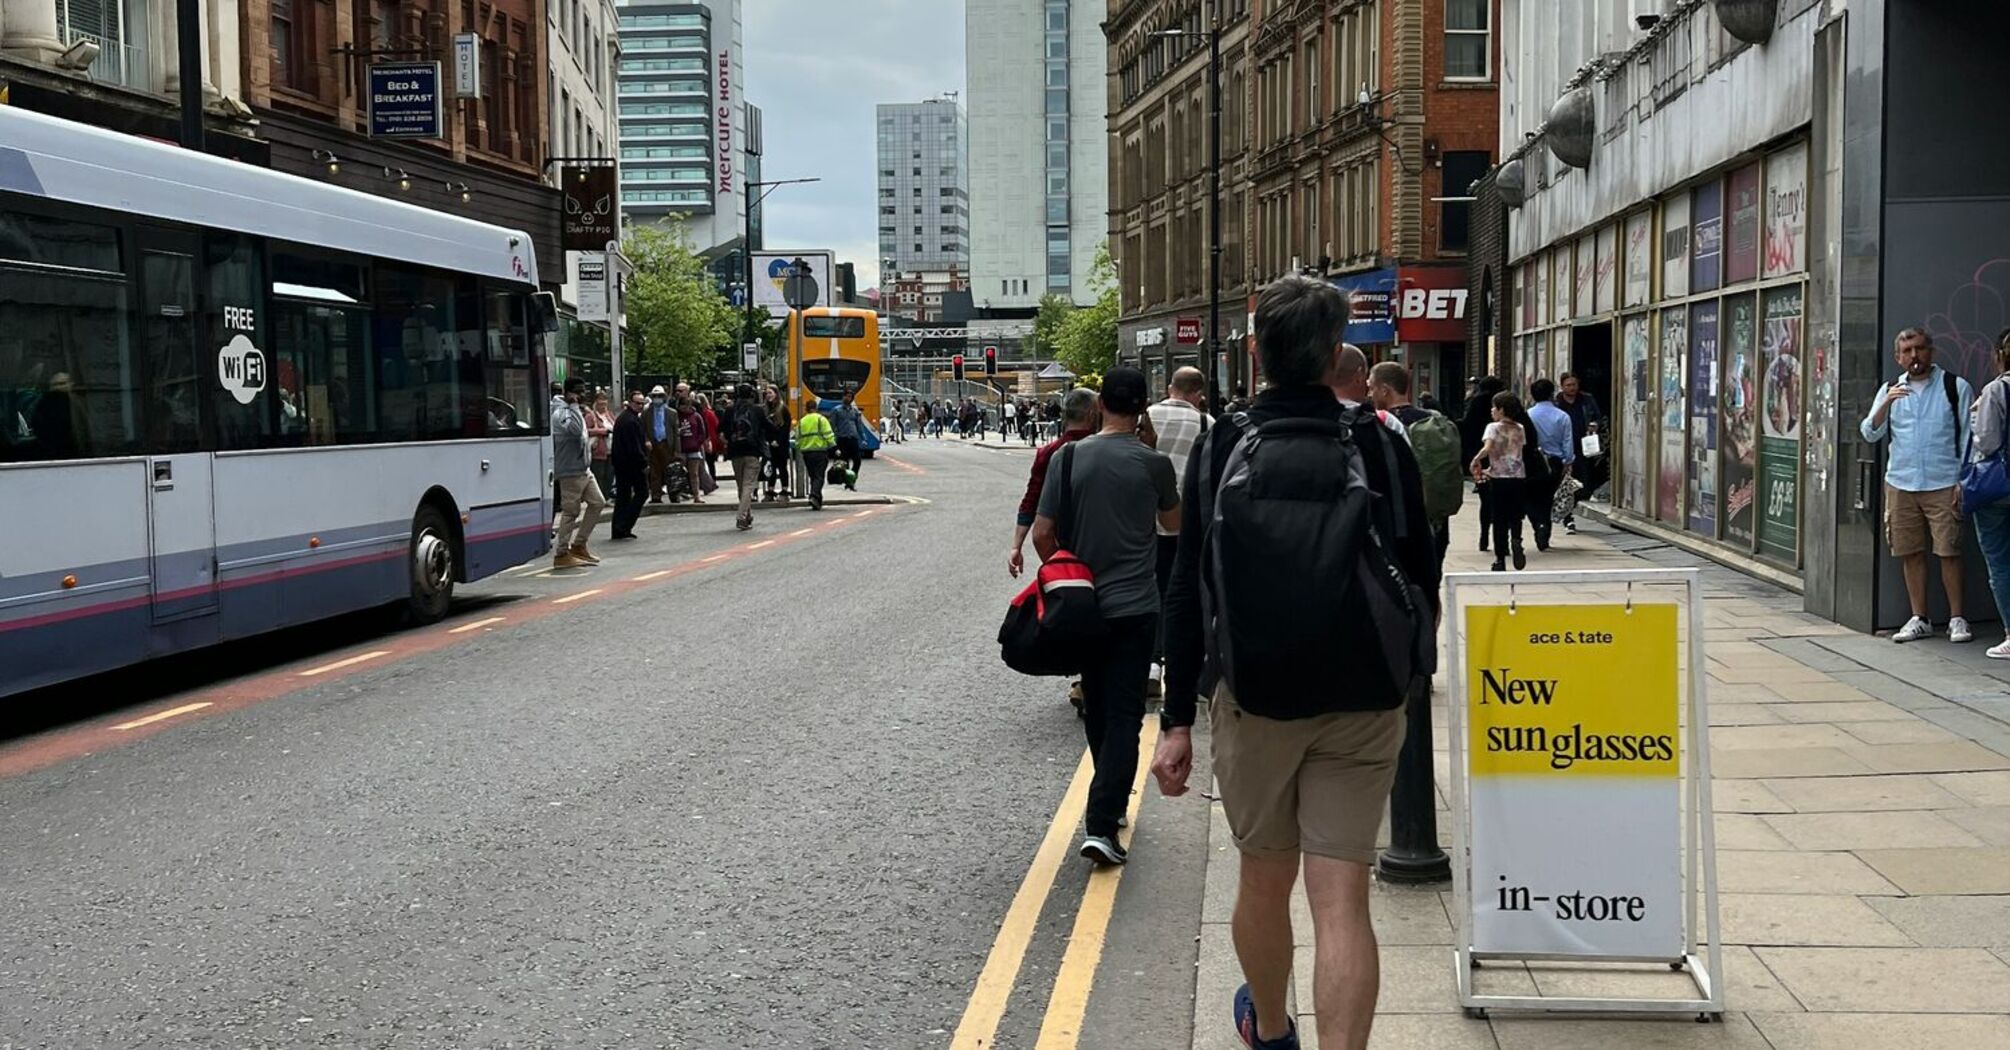 A bustling street in Manchester with buses and pedestrians, featuring historic and modern buildings